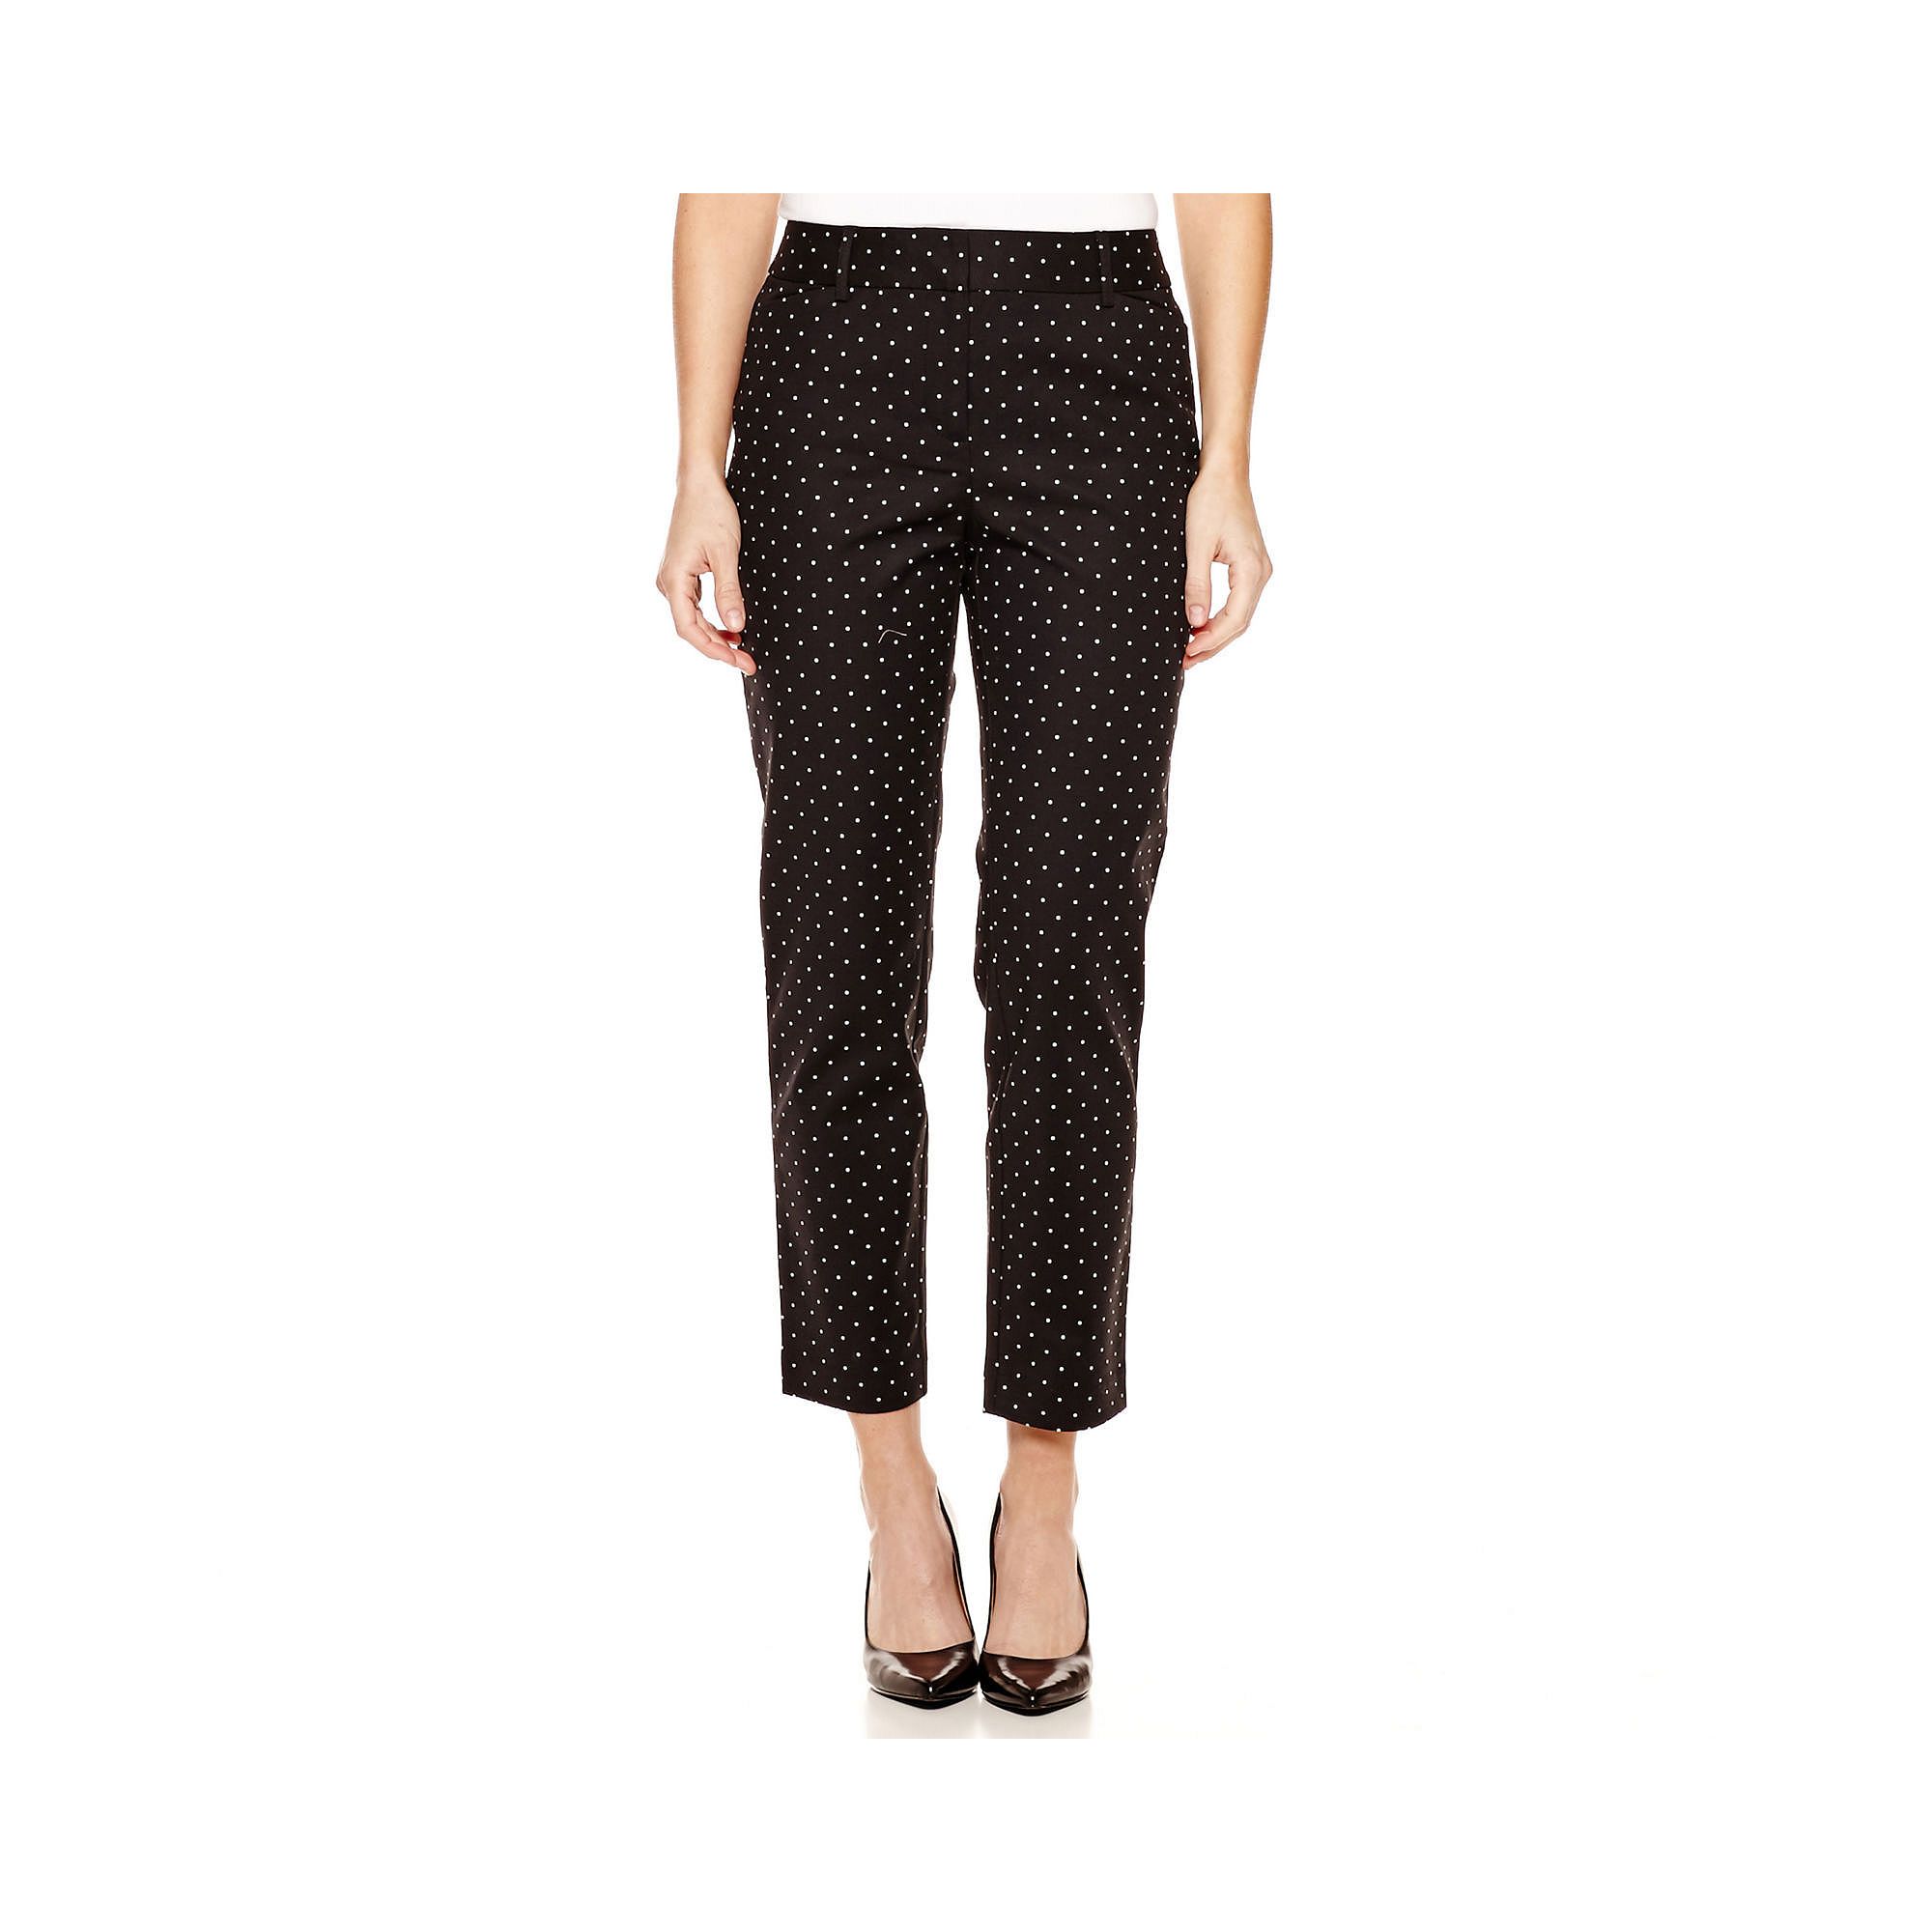 Liz Claiborne Classic Emma Ankle Pants - Tall | JCPenney